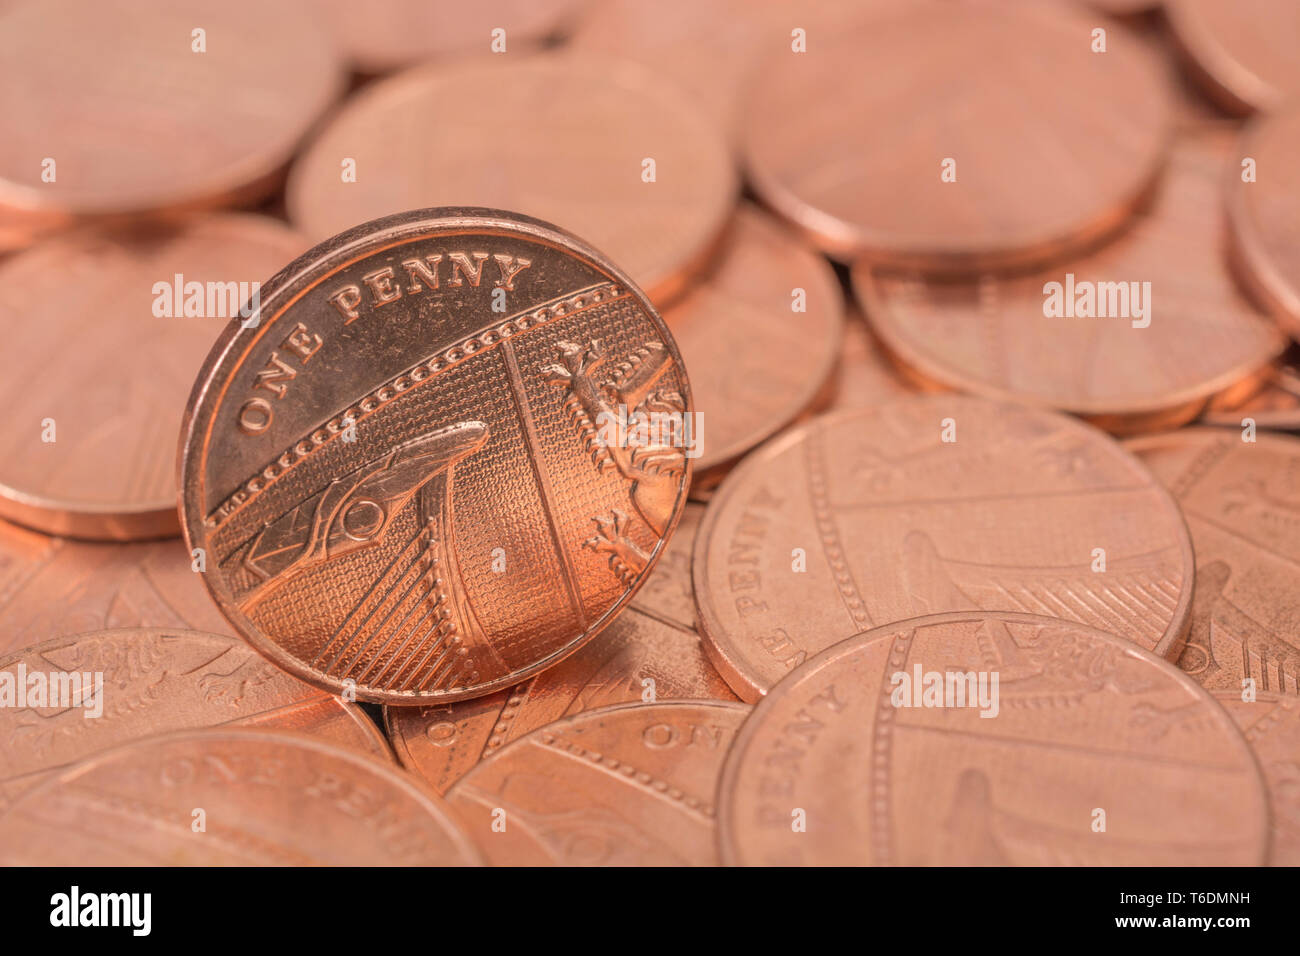 Macro close-up of British 1 Penny / 1p coin on bed pennies. Death of the penny, end of copper coins, penny withdrawal from circulation, Save the Penny Stock Photo